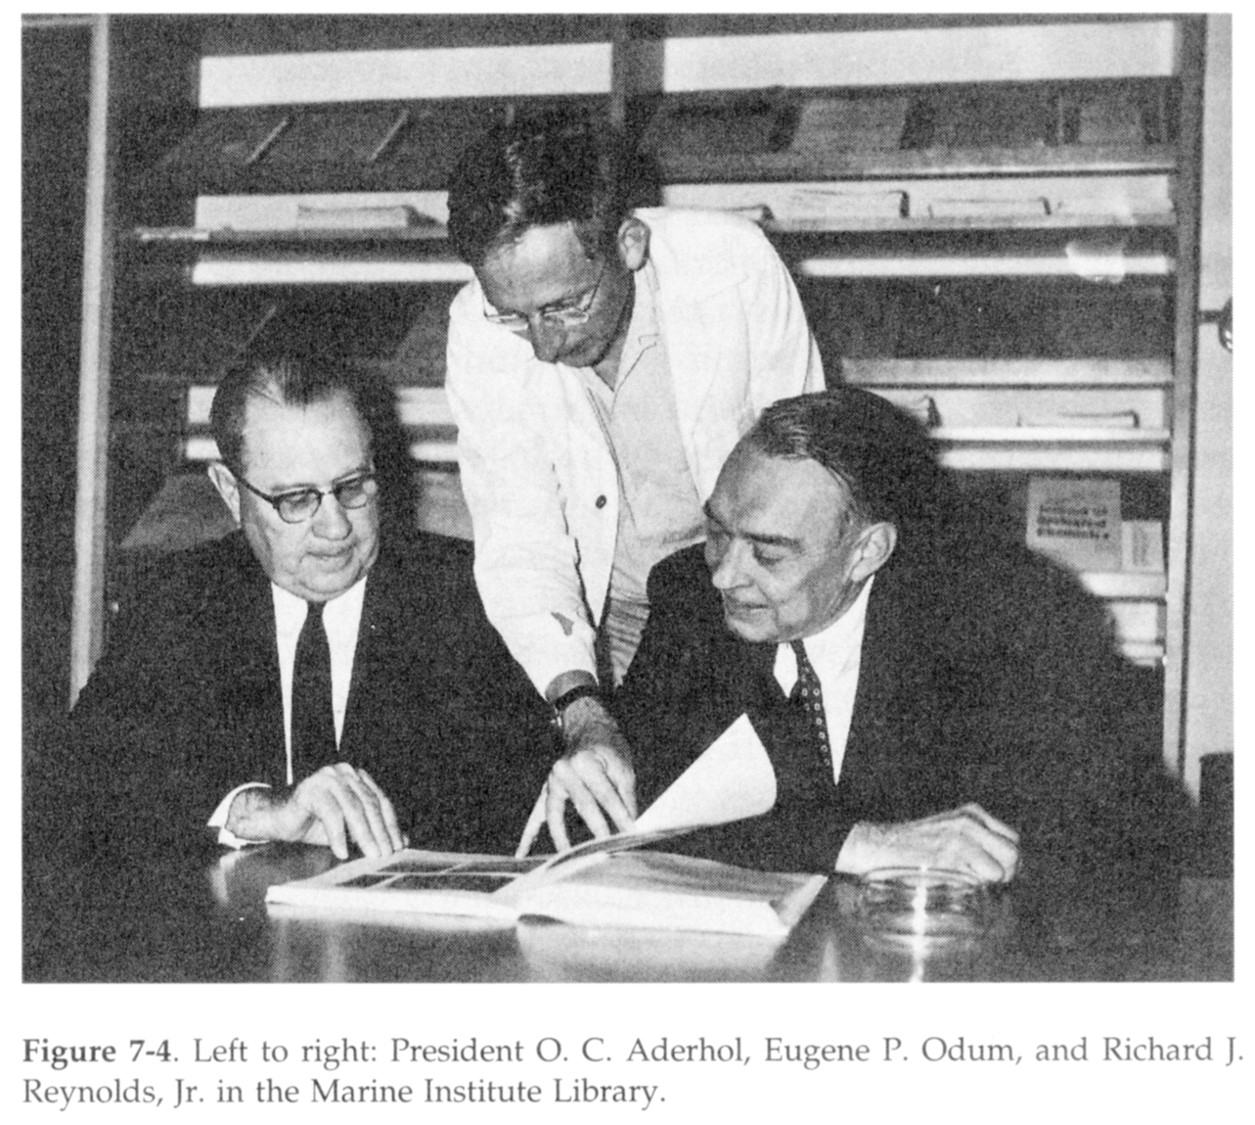 O.C. Aderhold, Eugene P. Odum and Richard J. Reynolds in the Marine Institute library